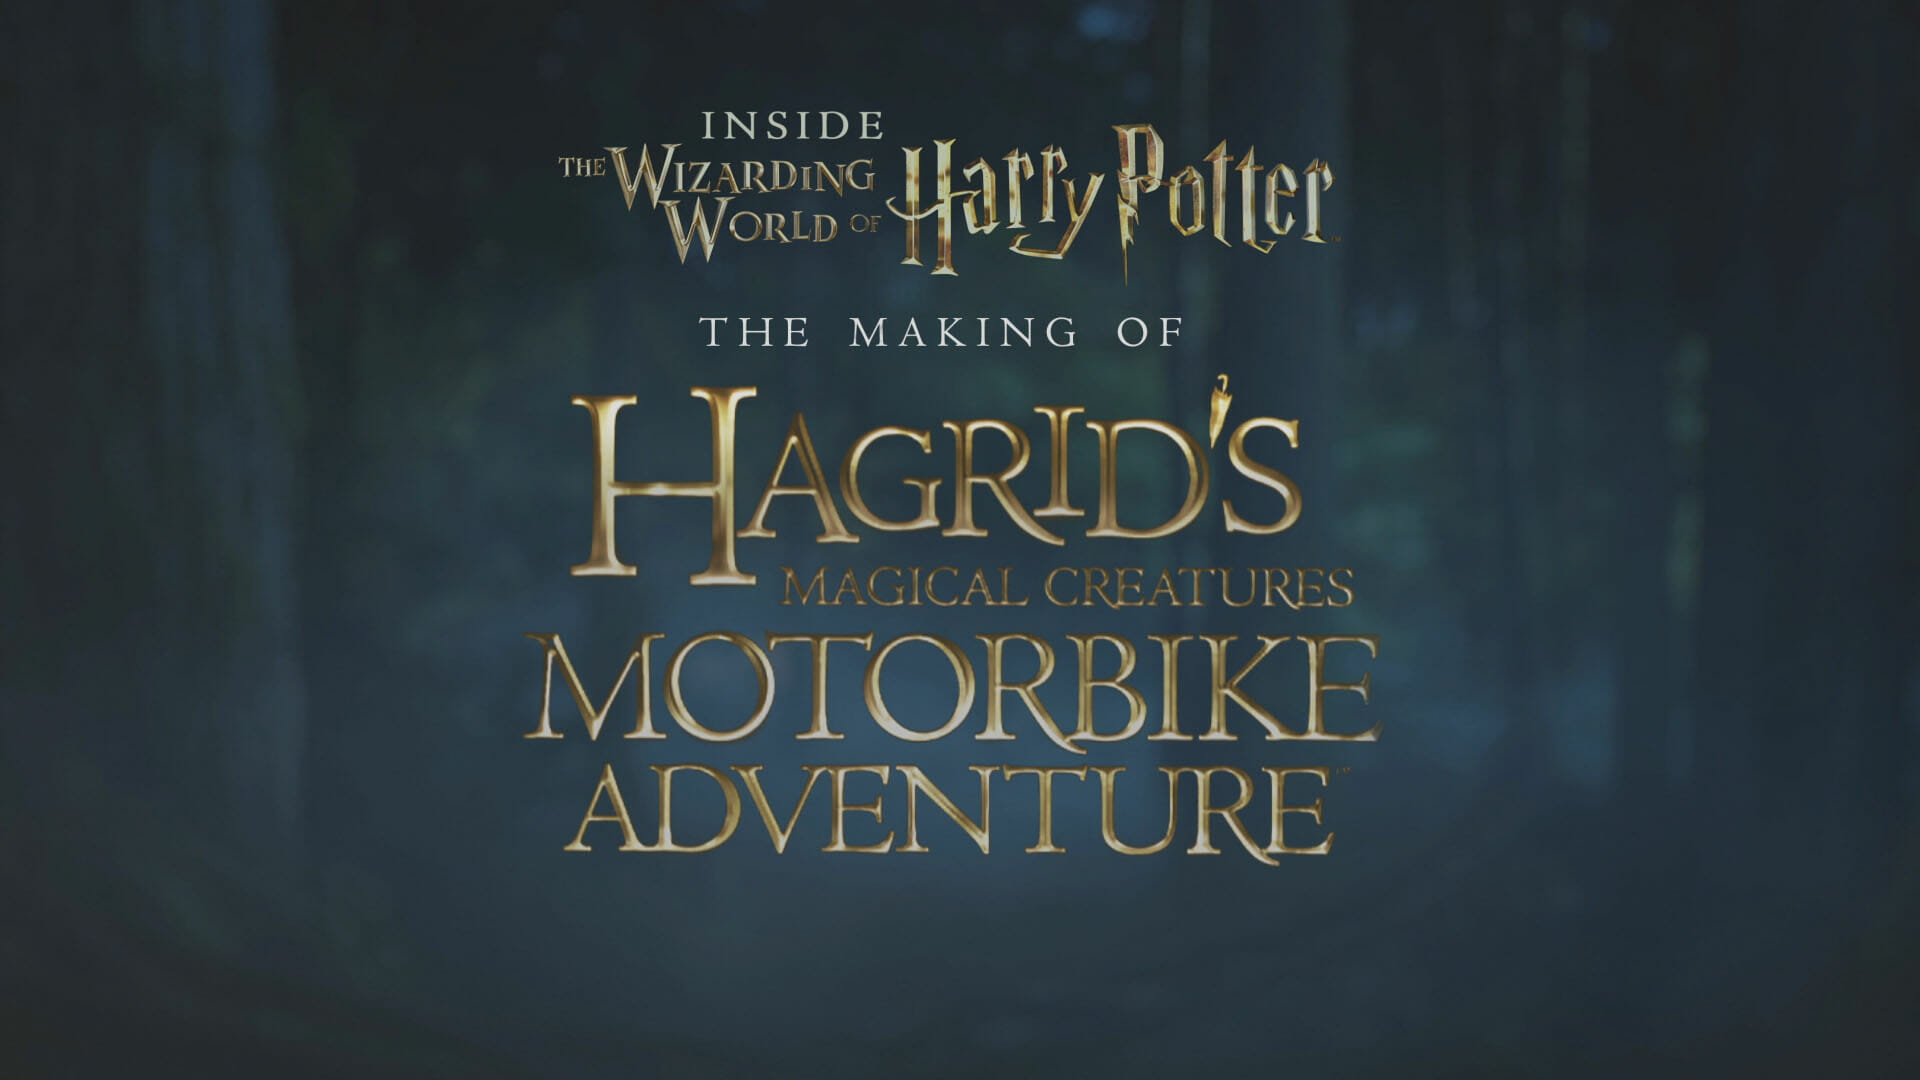 Get a Behind the Scenes Look at the Making of Hagrid’s Magical Creatures Motorbike Adventure